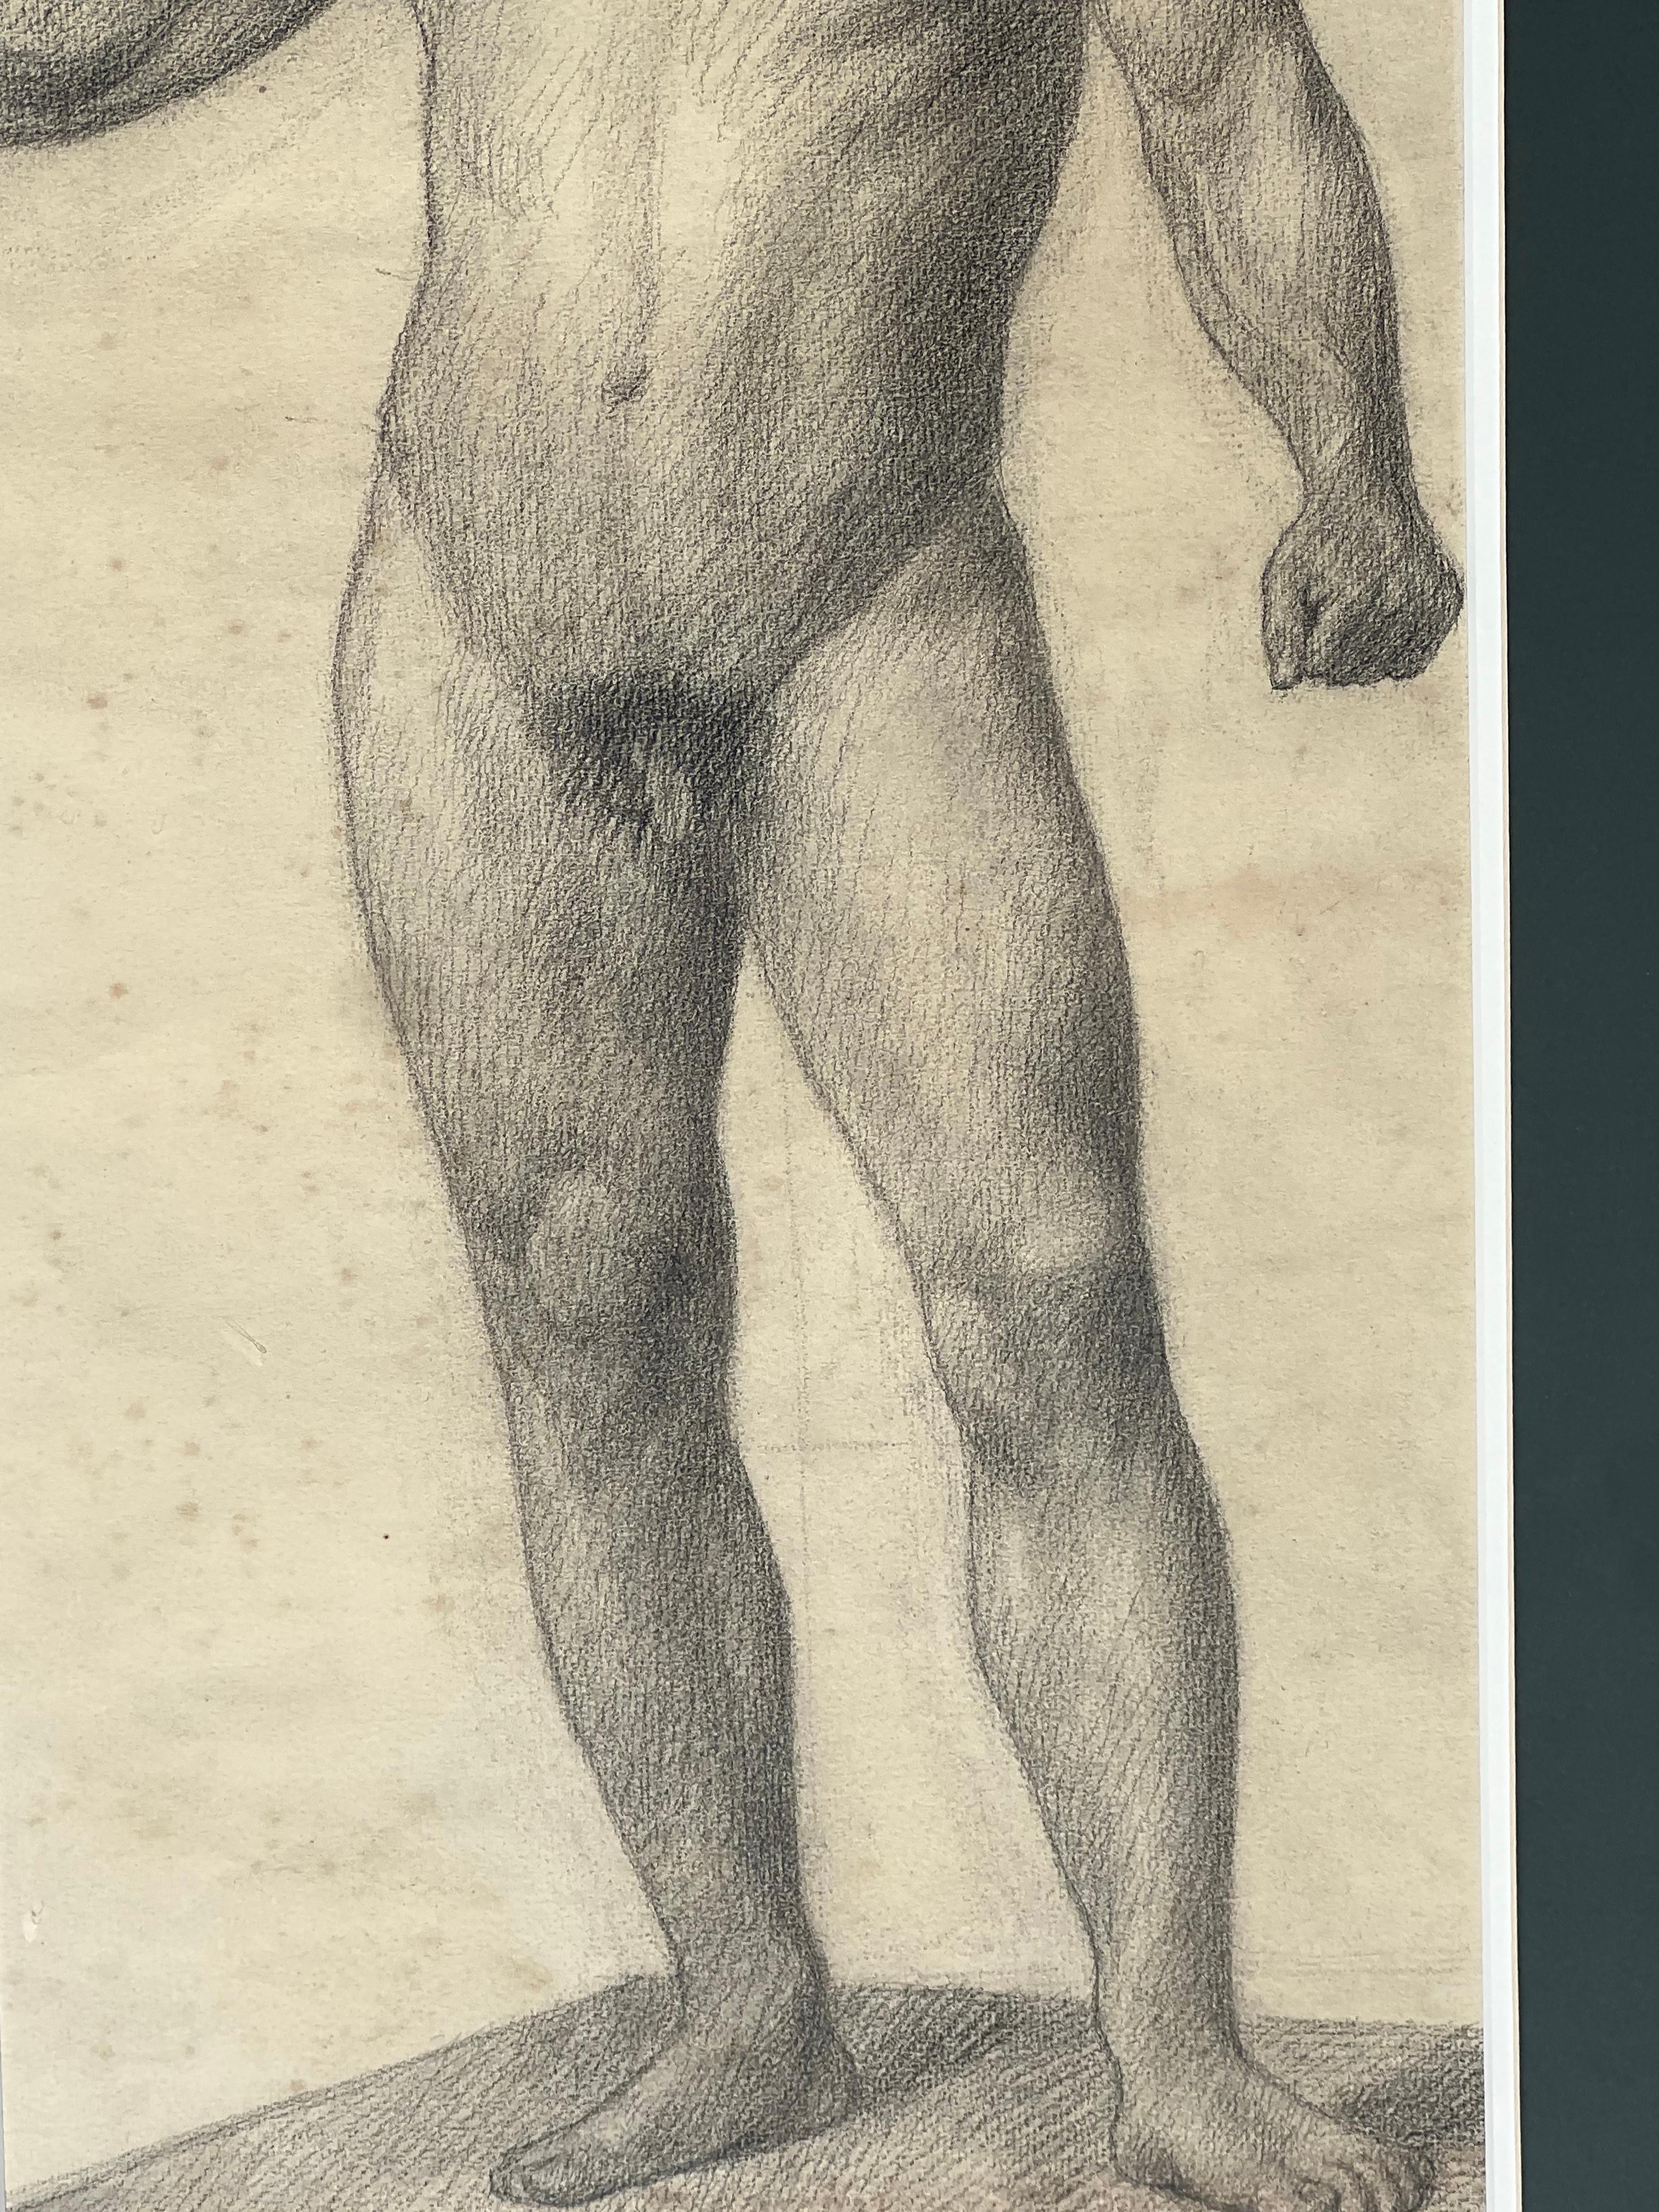 19th Century Large Antique Male Nude Art Study Drawing From Paris, Framed in Italy For Sale